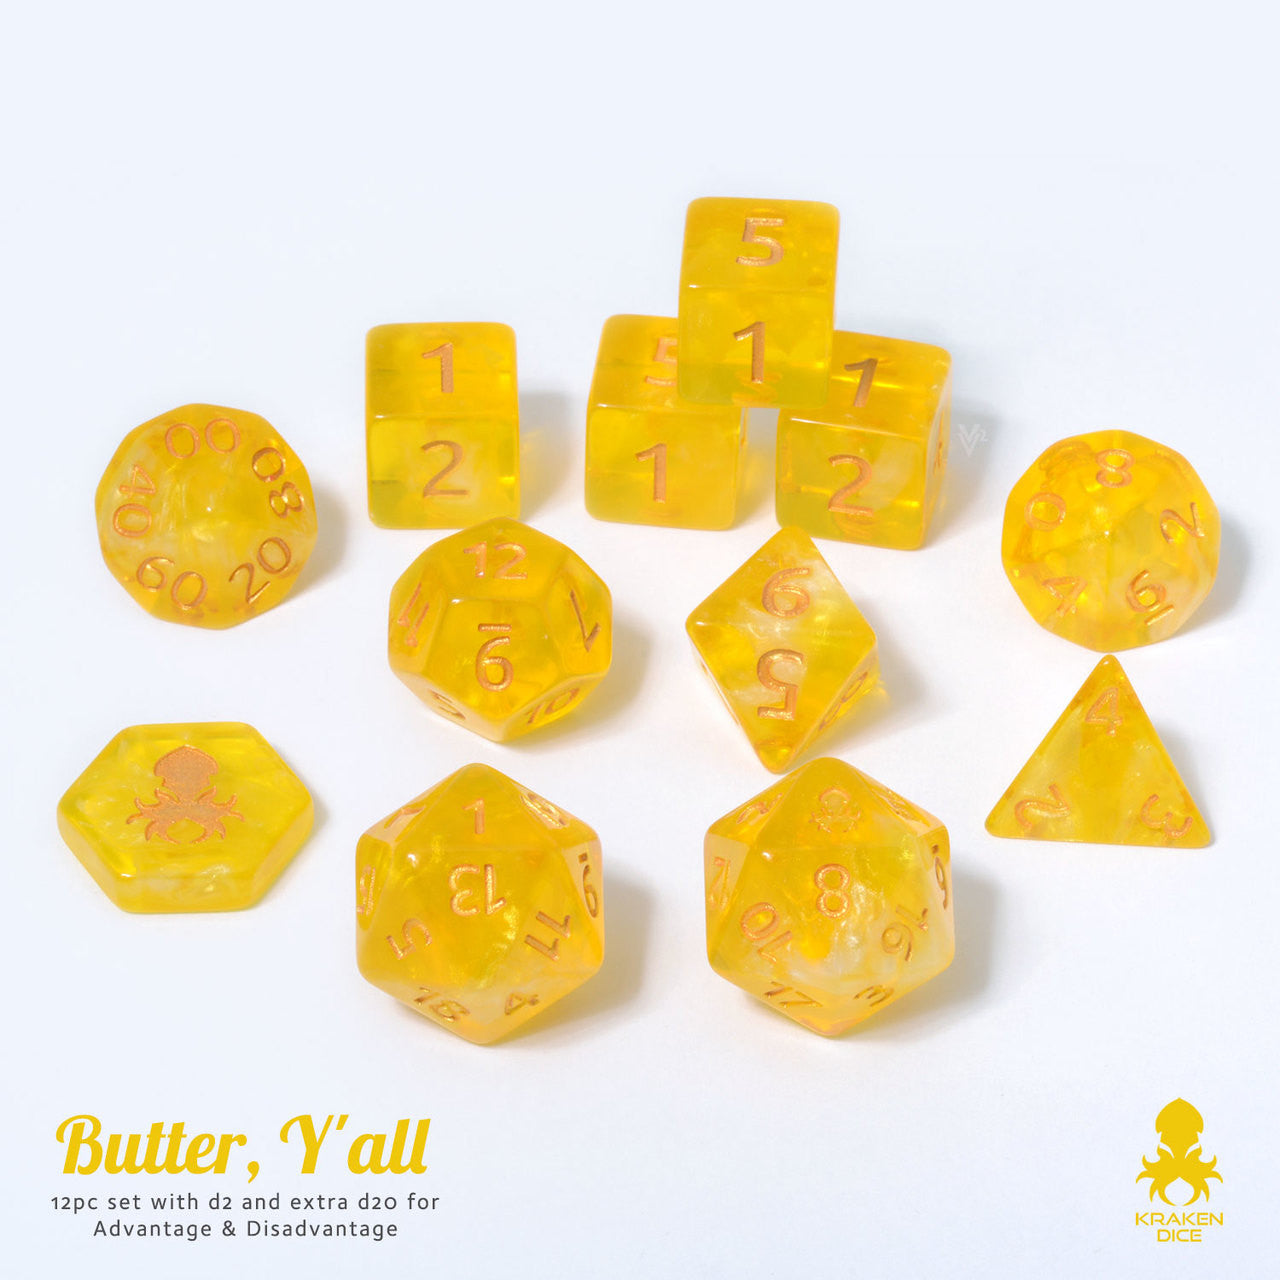 Butter, Y’all 12pc DnD Dice Set With Kraken Logo